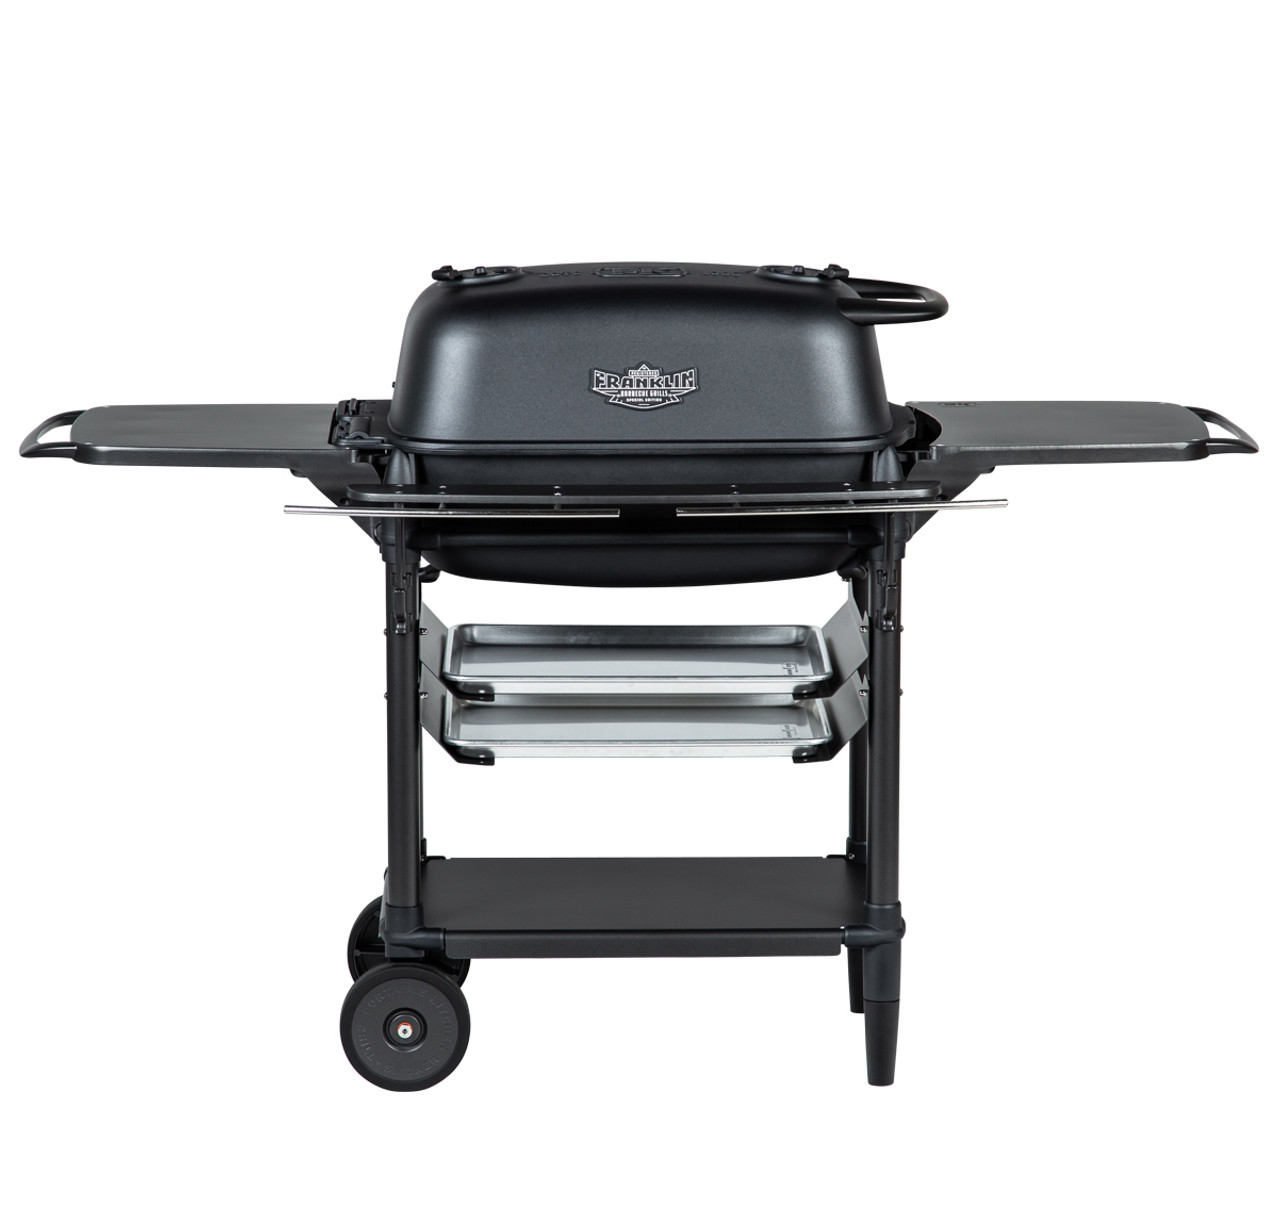 Pk Grills PK300AF Franklin Edition Grill and Smoker, Coal